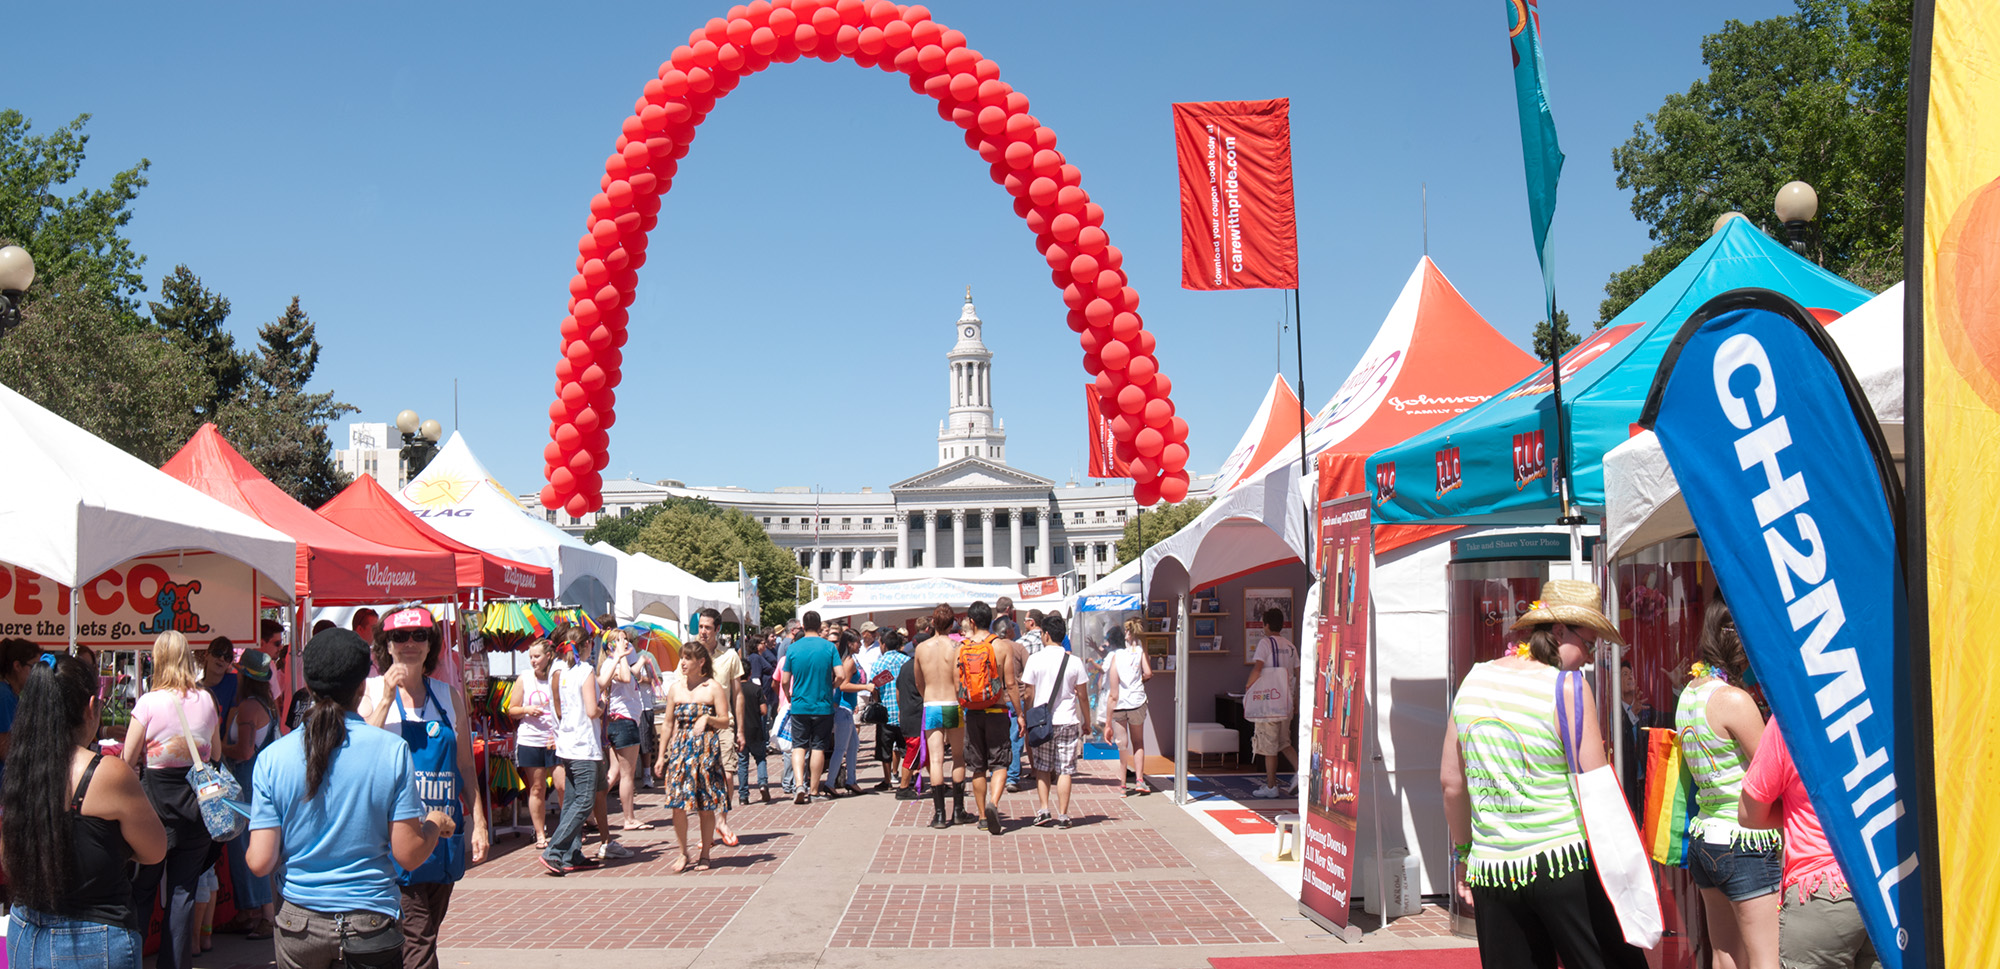 A row of vendors line the thoroughfare. The Denver City and County building rises in the center with a large, red arch of balloons arcs over it.